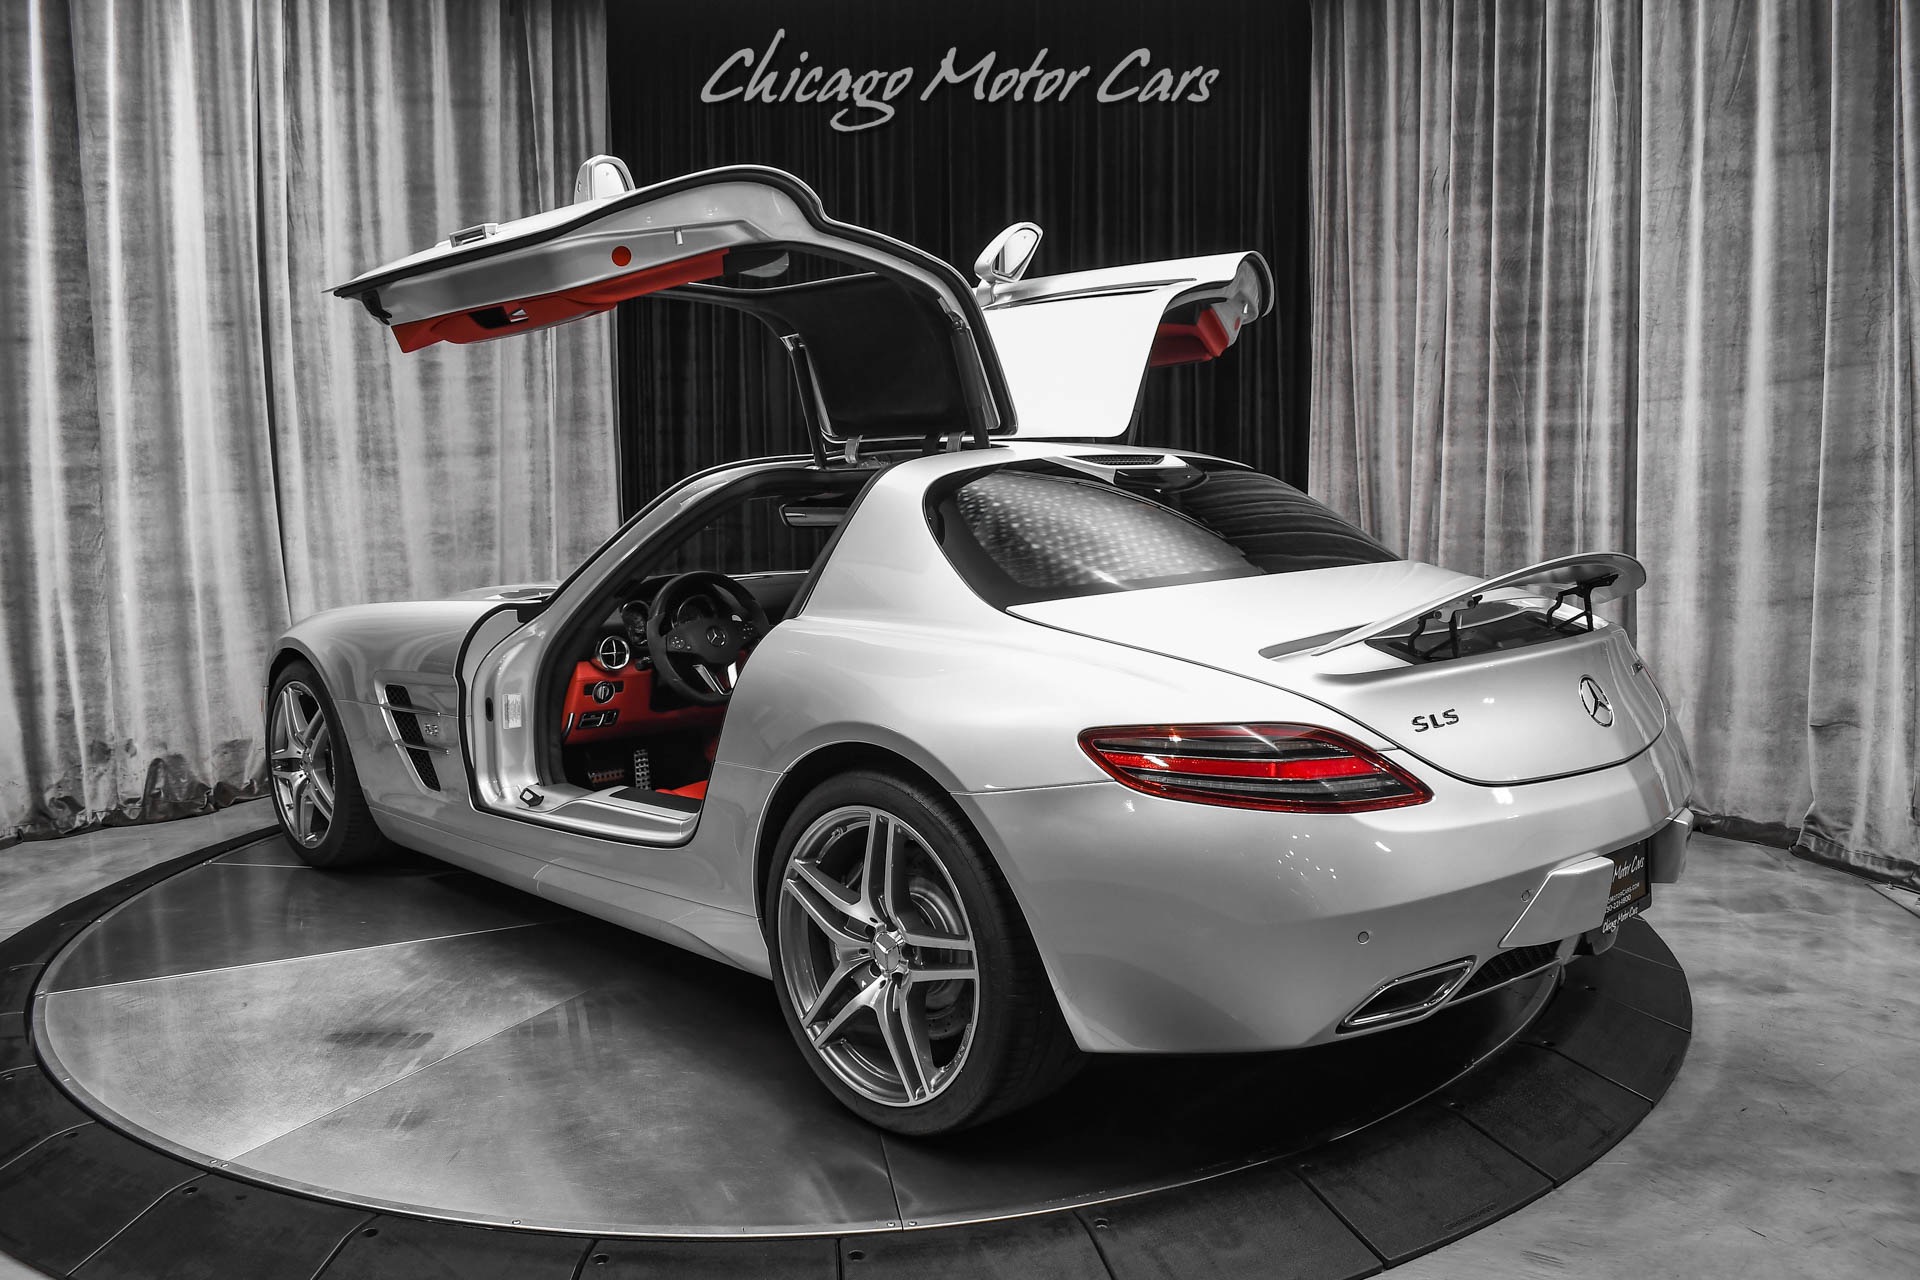 Used-2012-Mercedes-Benz-SLS-AMG-RARE-Gullwing-Coupe-HOT-Color-Combo-Carbon-Fiber-Trim-B-O-ONLY-7k-Miles